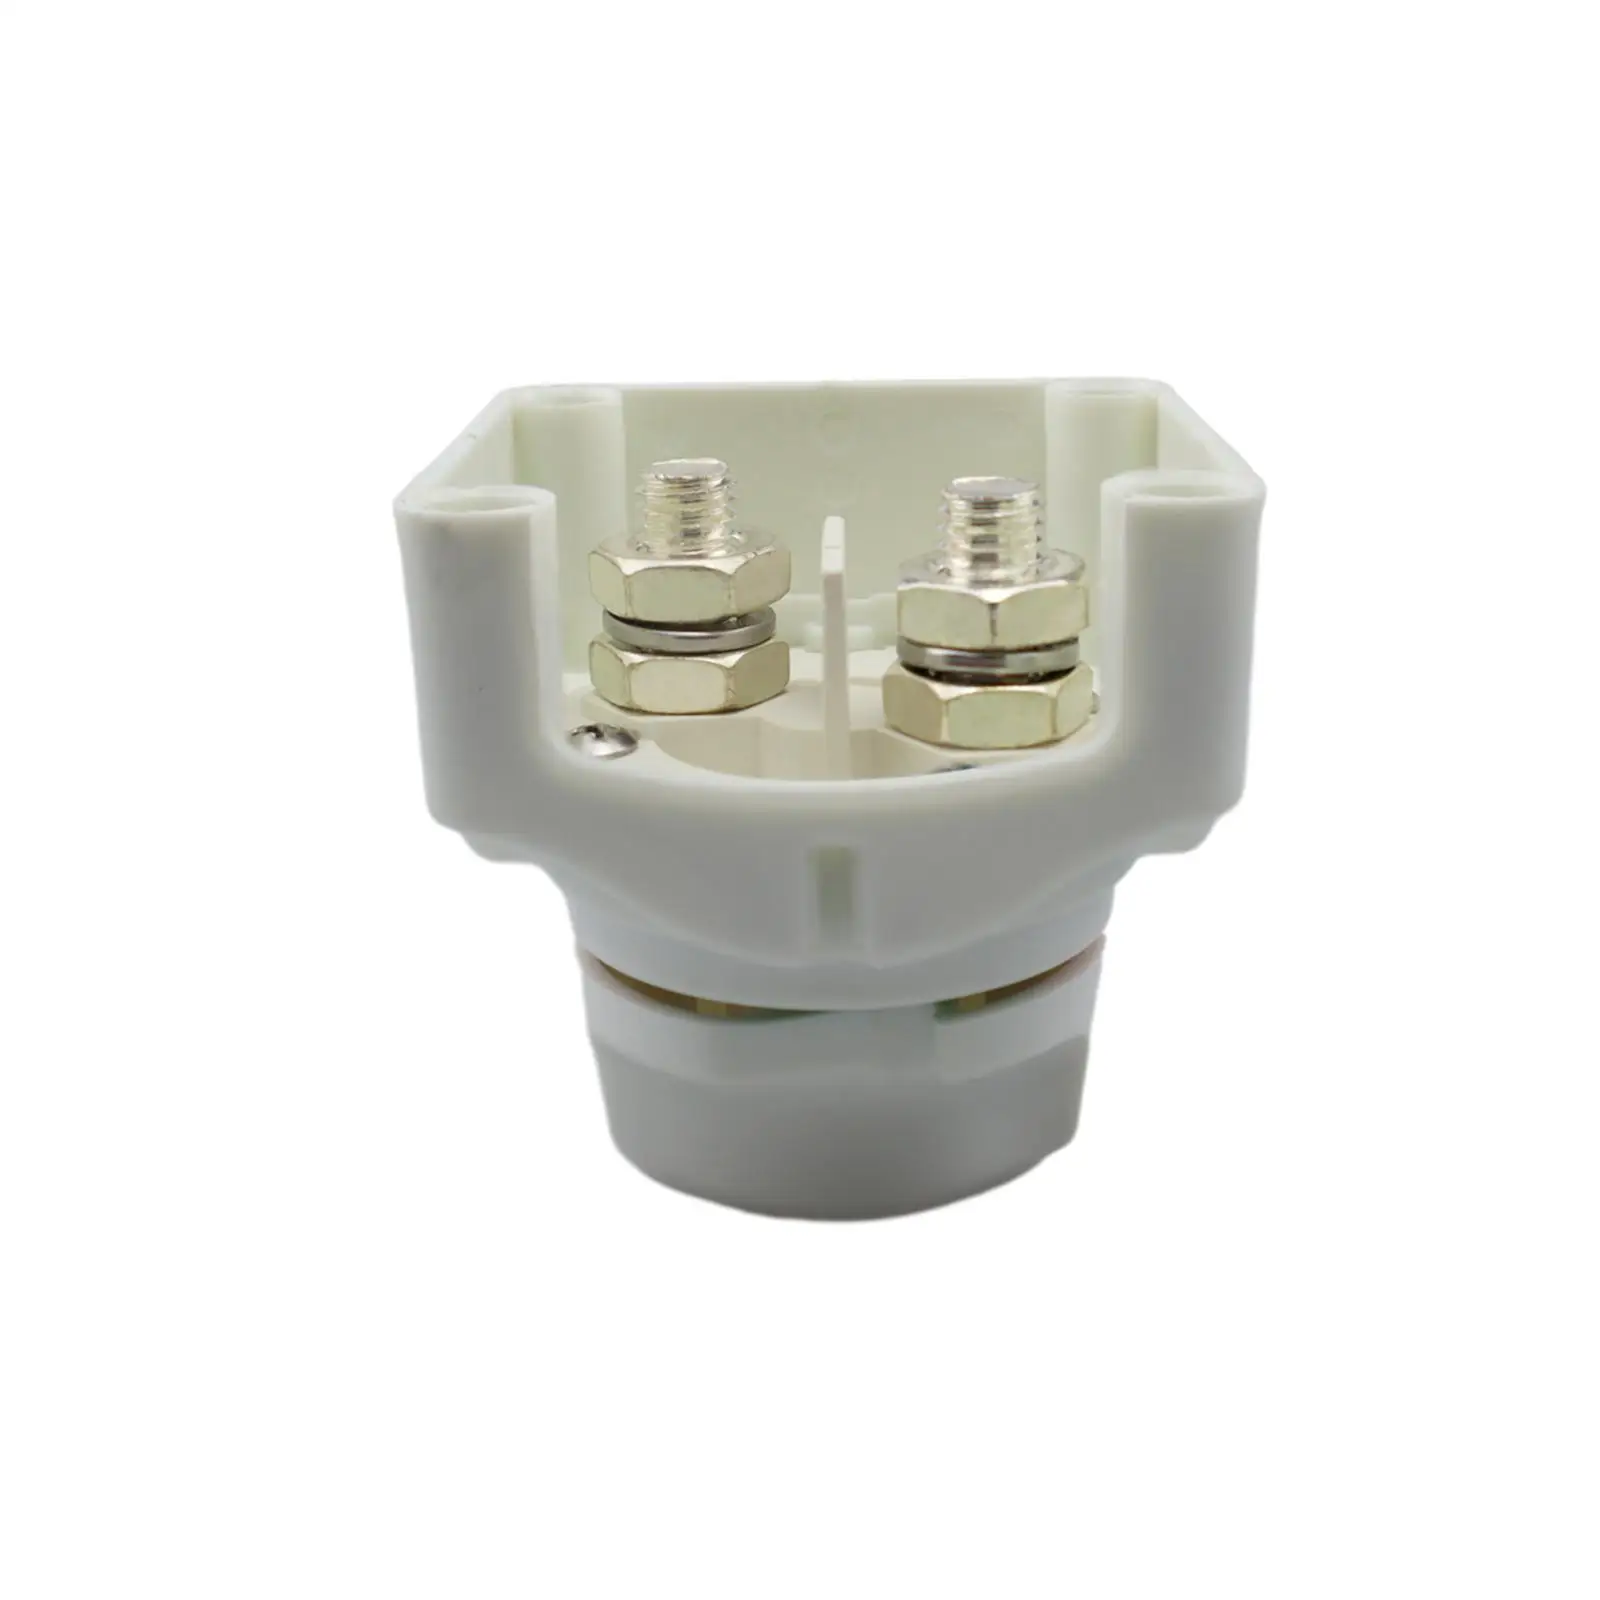 Battery Switch Battery Power Cut Switch for Marine Truck Vehicle